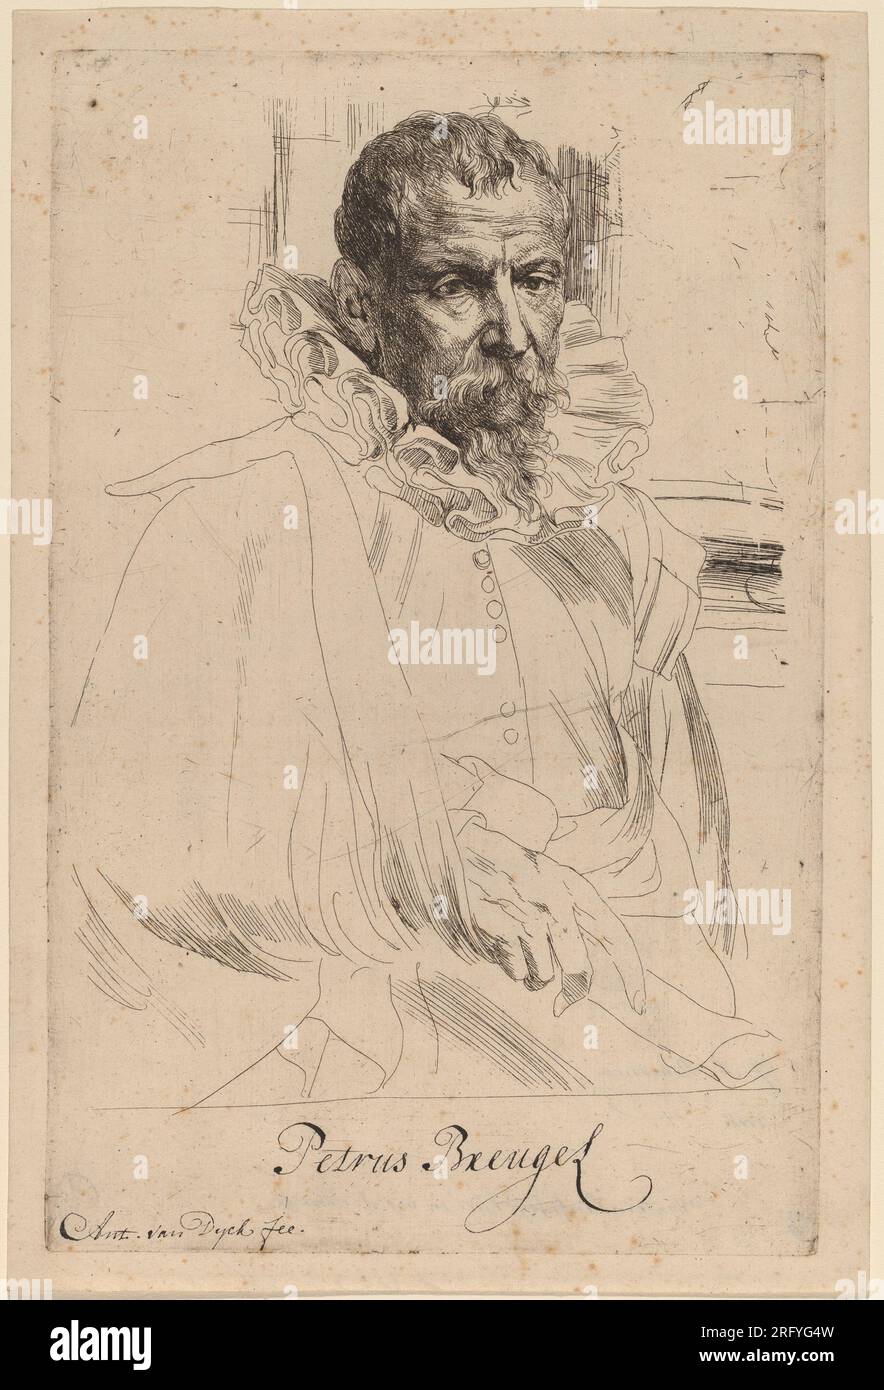 'Sir Anthony van Dyck, Pieter Bruegel the Younger, probably 1626/1641, etching, plate: 24.1 x 15.5 cm (9 1/2 x 6 1/8 in.) sheet: 25.7 x 17.3 cm (10 1/8 x 6 13/16 in.), Rosenwald Collection, 1943.3.8249' Stock Photo